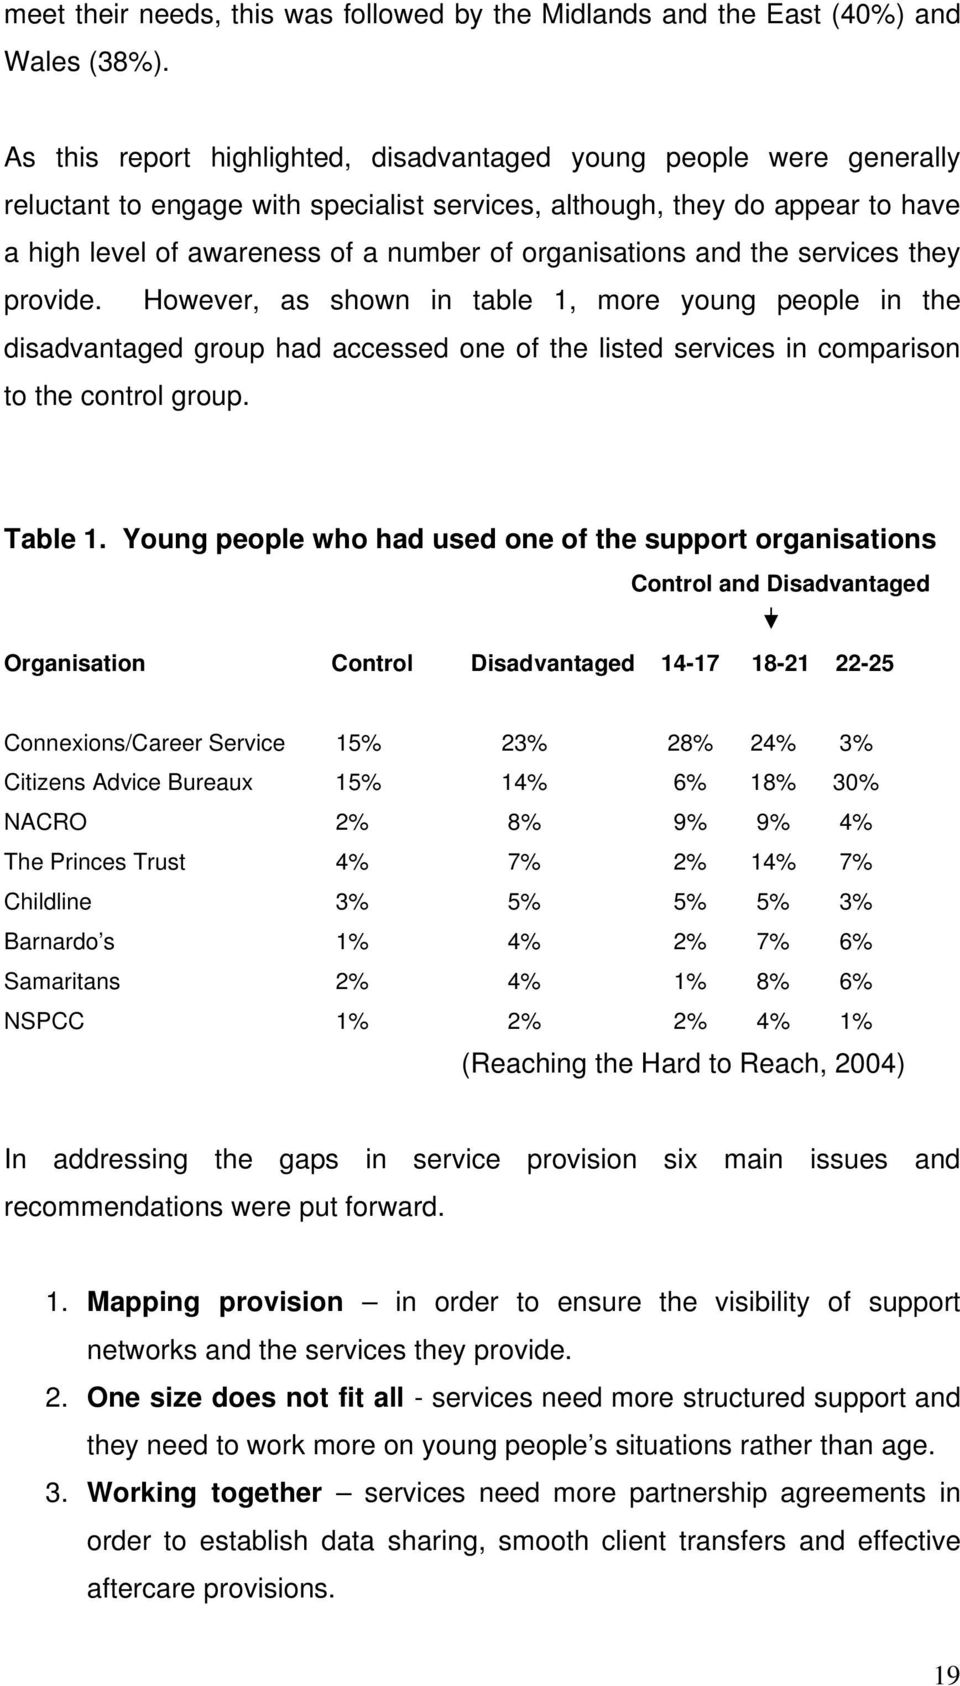 organisations and the services they provide. However, as shown in table 1, more young people in the disadvantaged group had accessed one of the listed services in comparison to the control group.